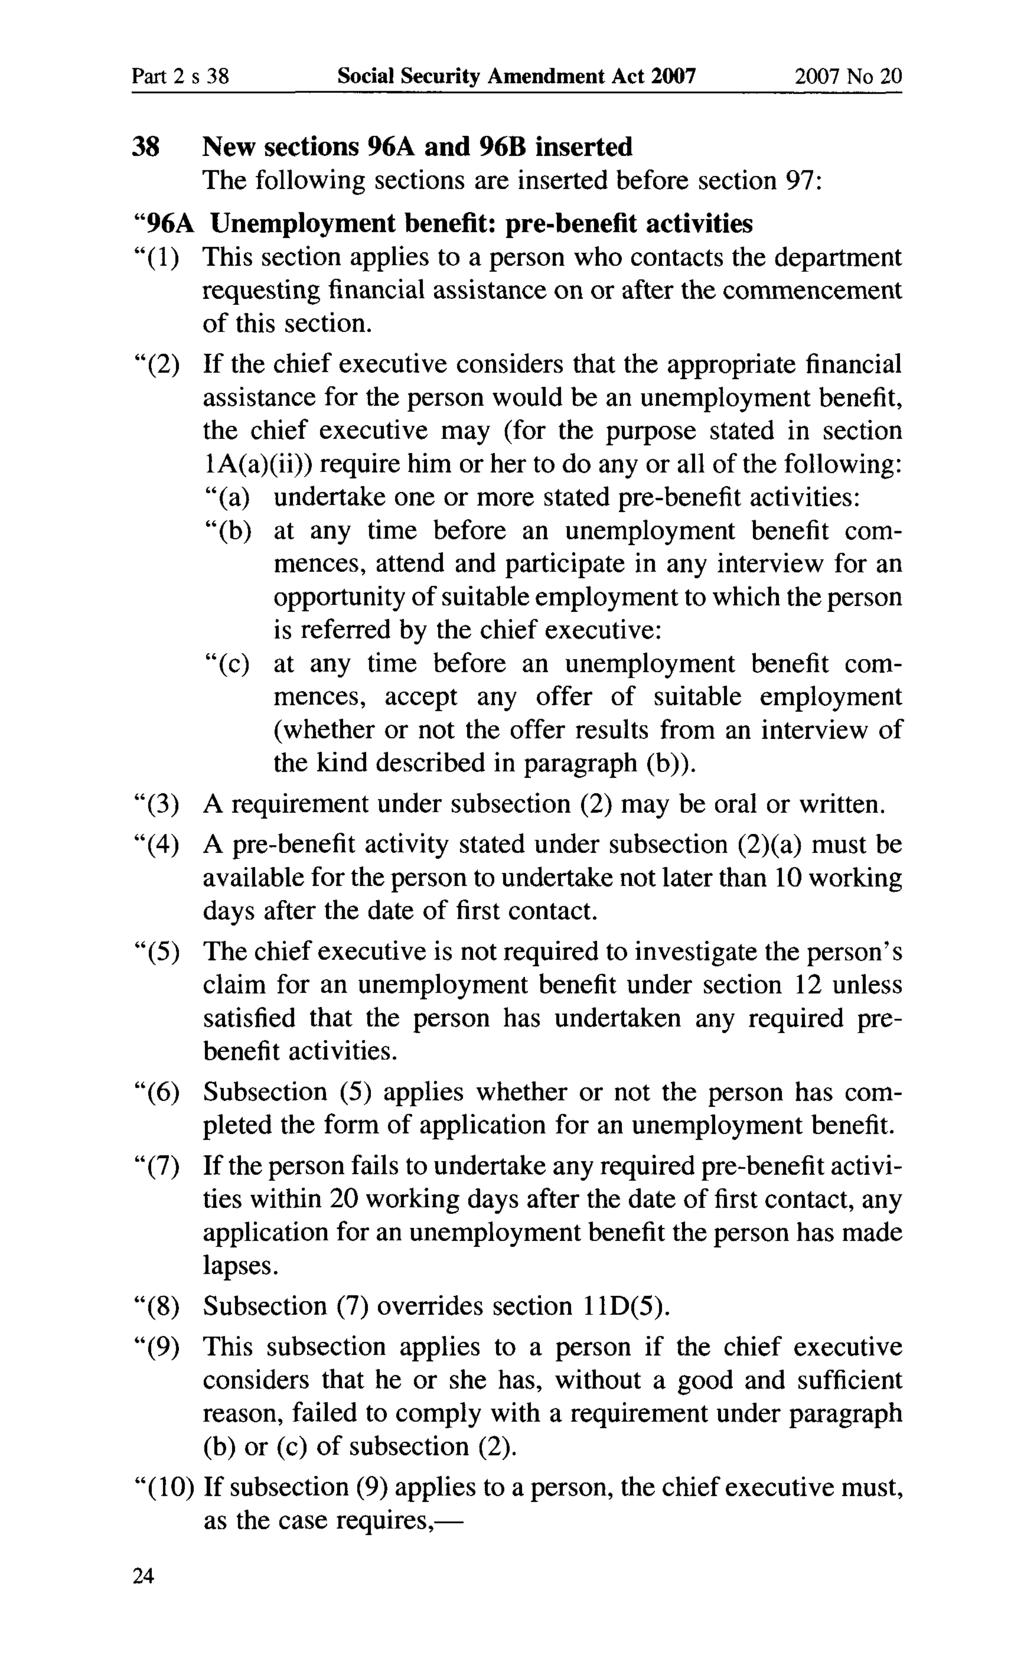 Part 2 s 38 Social Security Amendment Act 2007 2007 No 20 38 New sections 96A and 96B inserted The following sections are inserted before section 97: "96A Unemployment benefit: pre-benefit activities